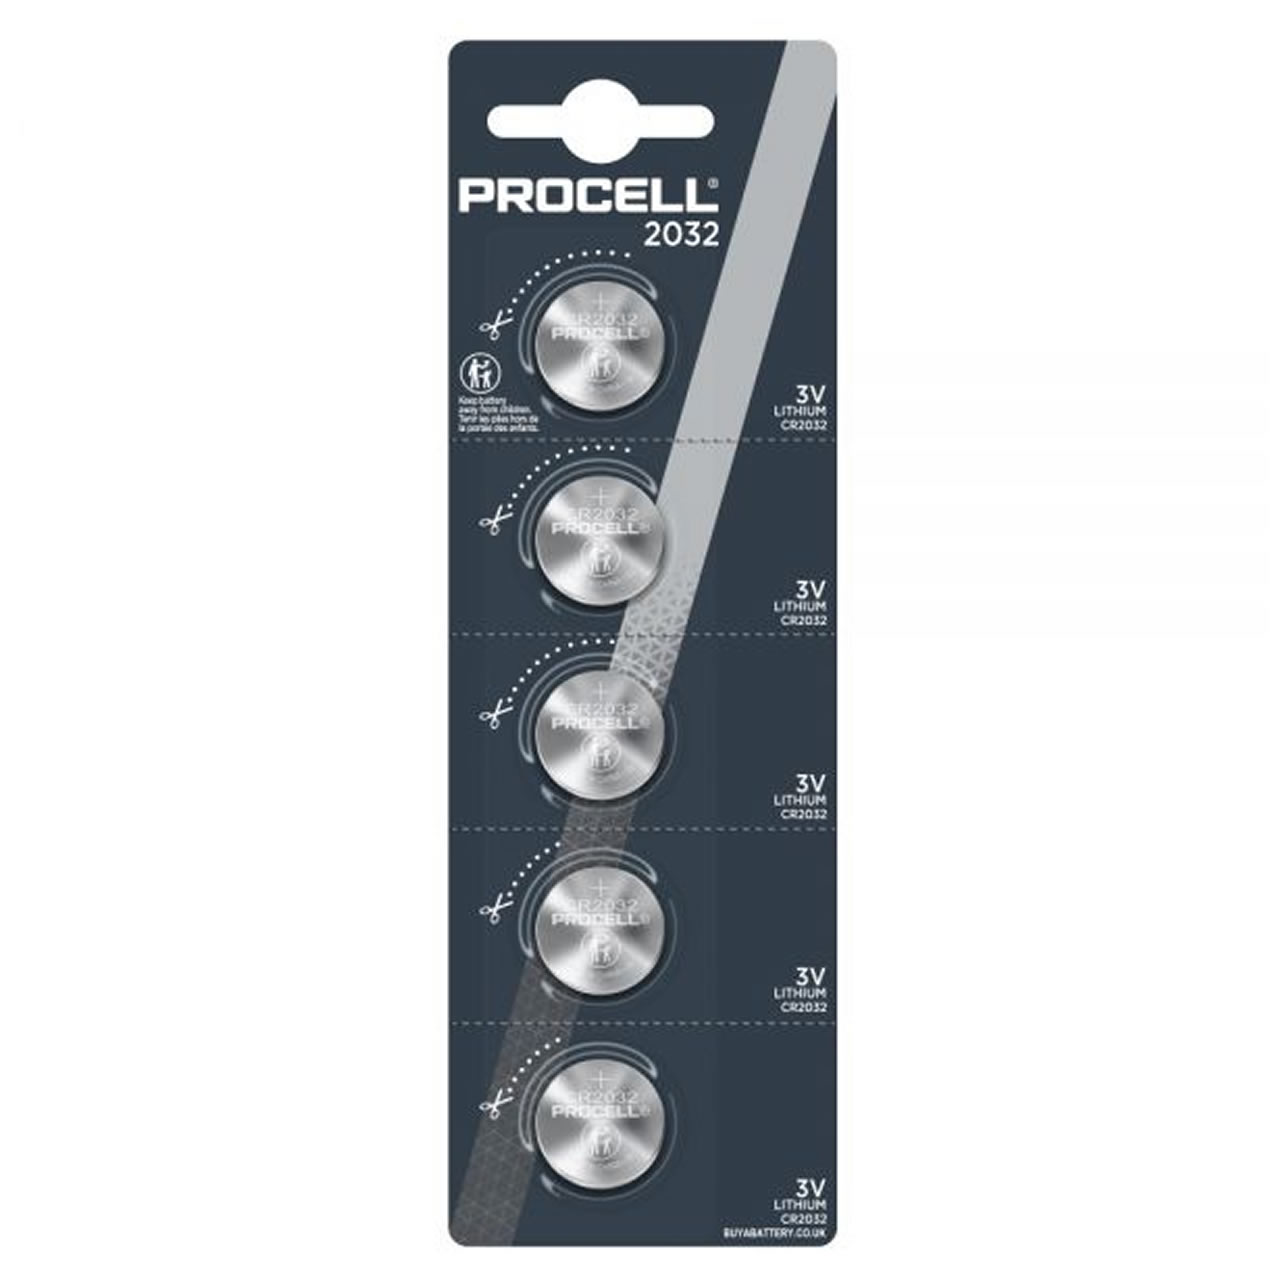 Procell Lithium Coin Cell Battery CR2032 (Pack of 5)